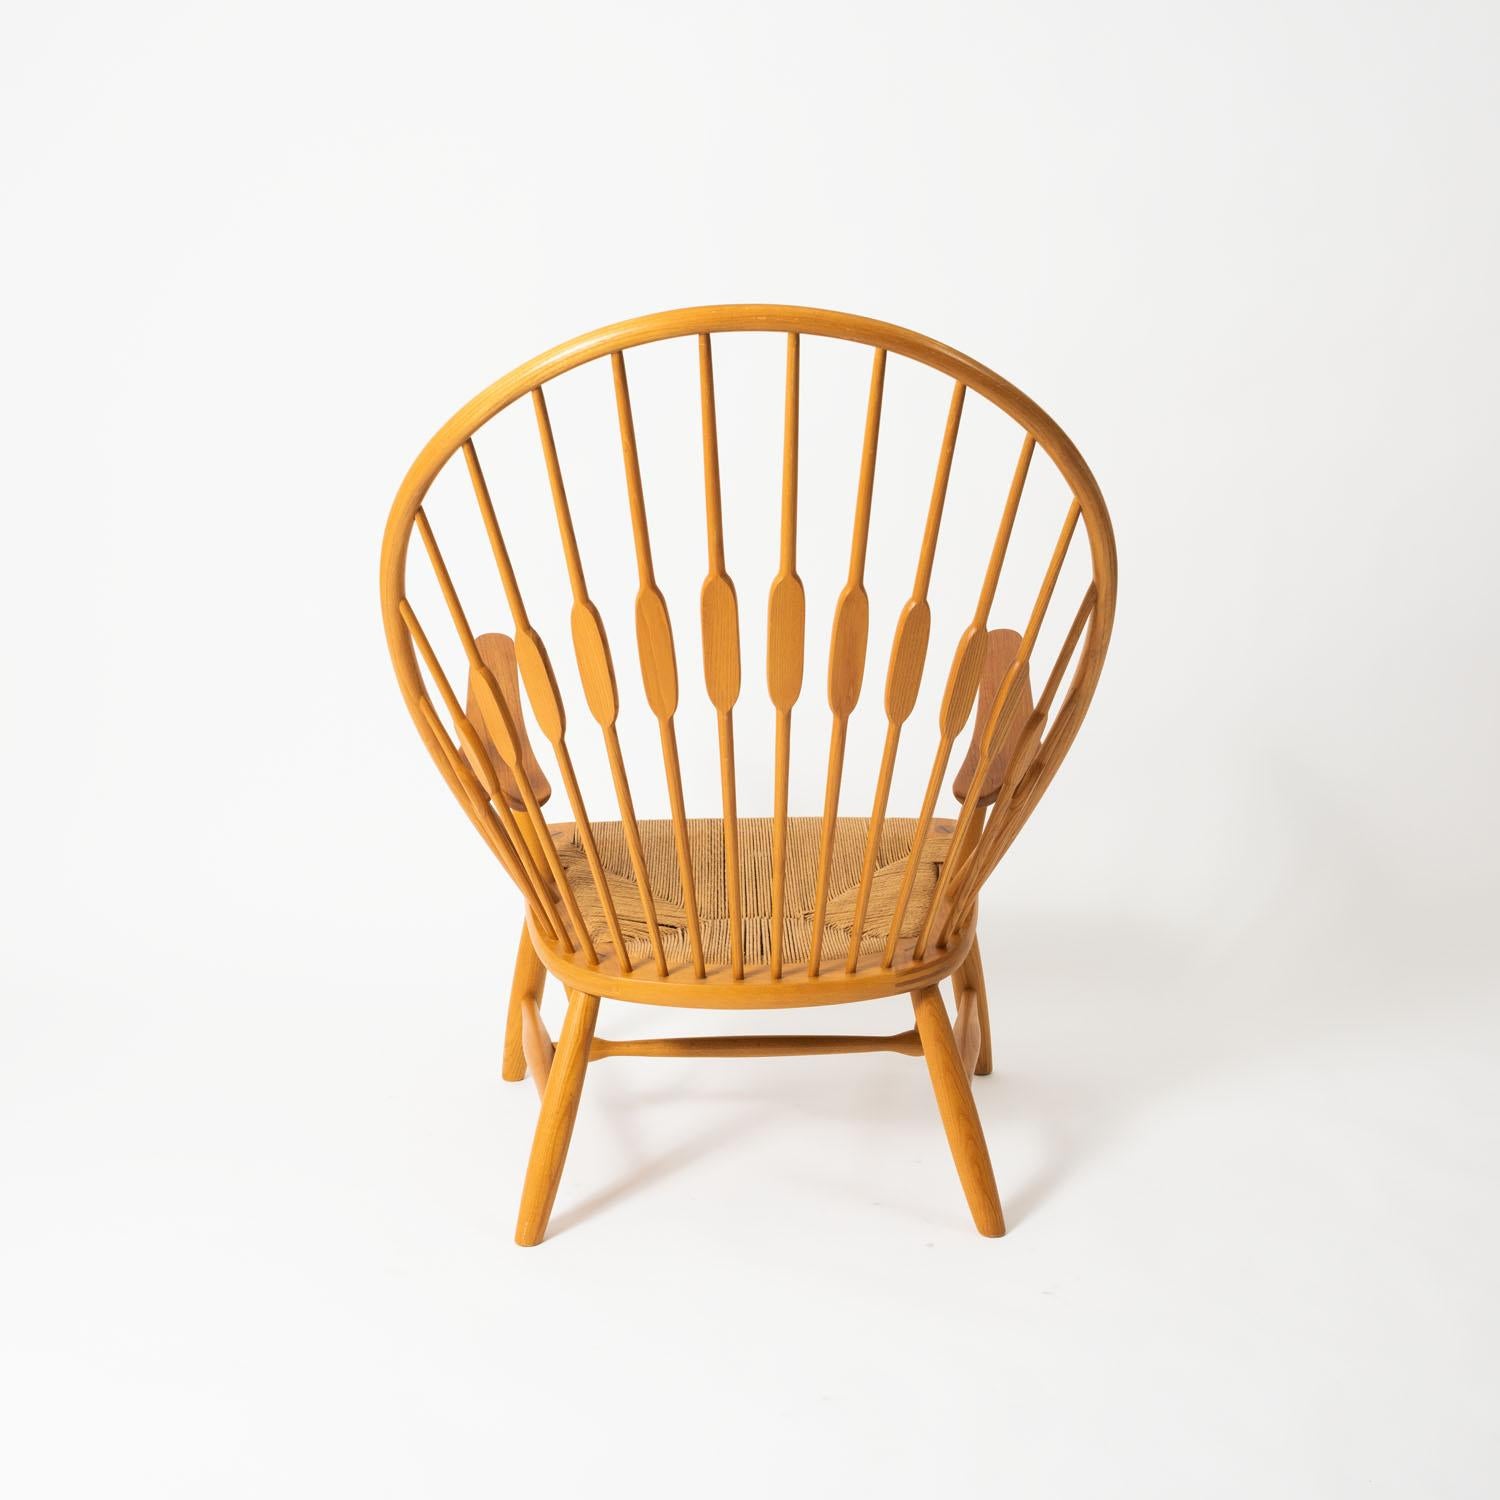 Hans Wegner JH50 Chair, or more commonly known as the “Peacock Chair” had its name blessed by famous designer, Finn Juhl, and was designed in 1947 and produced by Johannes Hansen. This particular piece is from circa 1950s and is in overall good